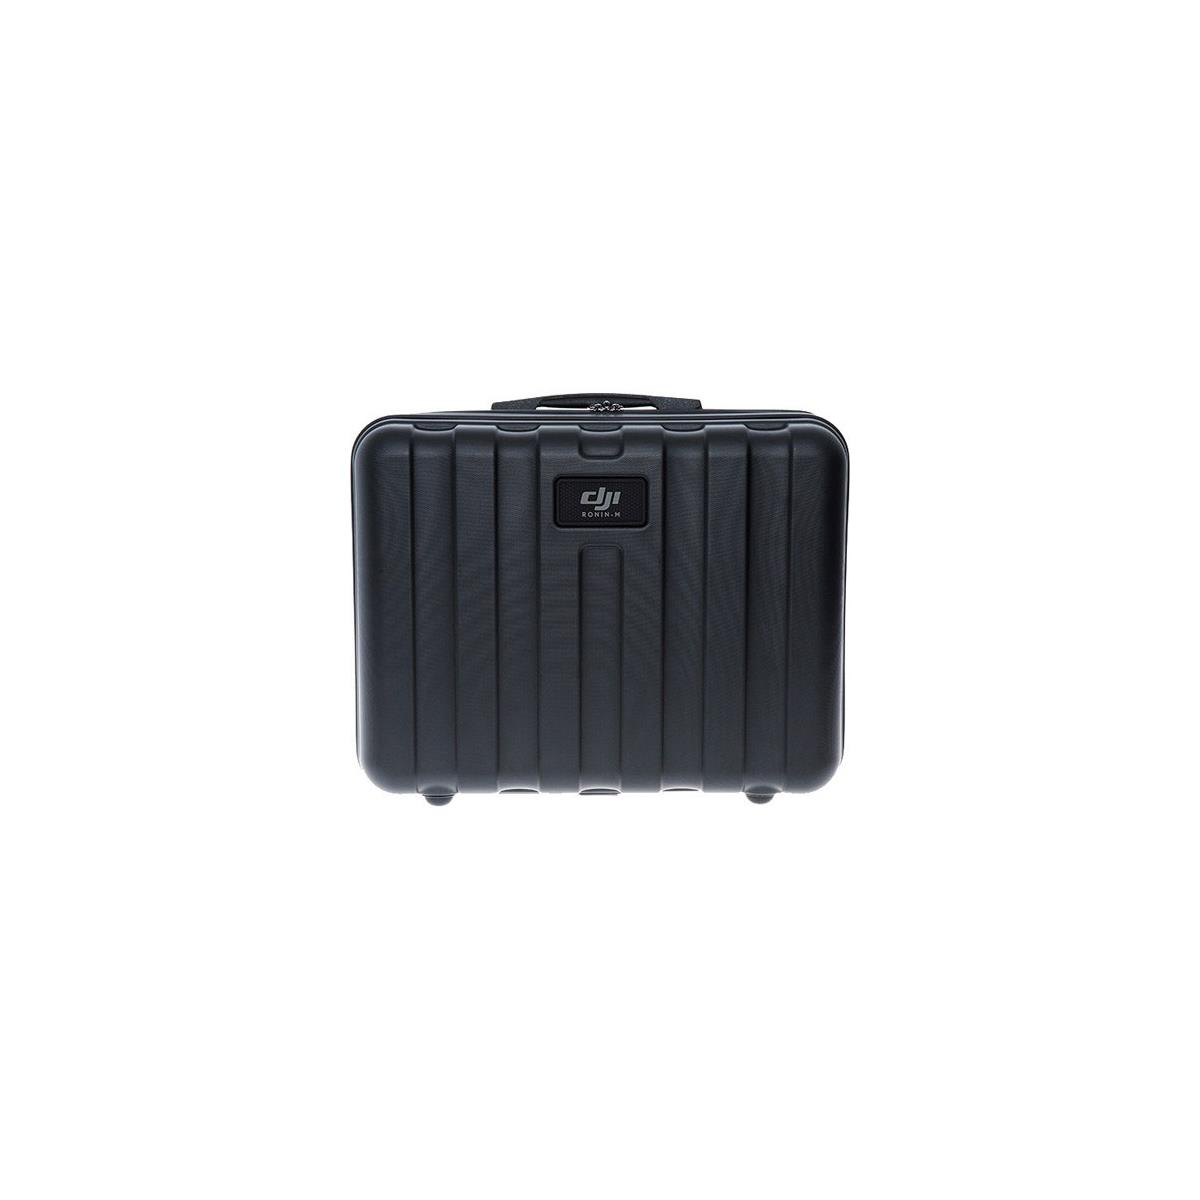 DJI Part 34 Suitcase for Ronin-M Gimbal, Black -  CP.ZM.000236